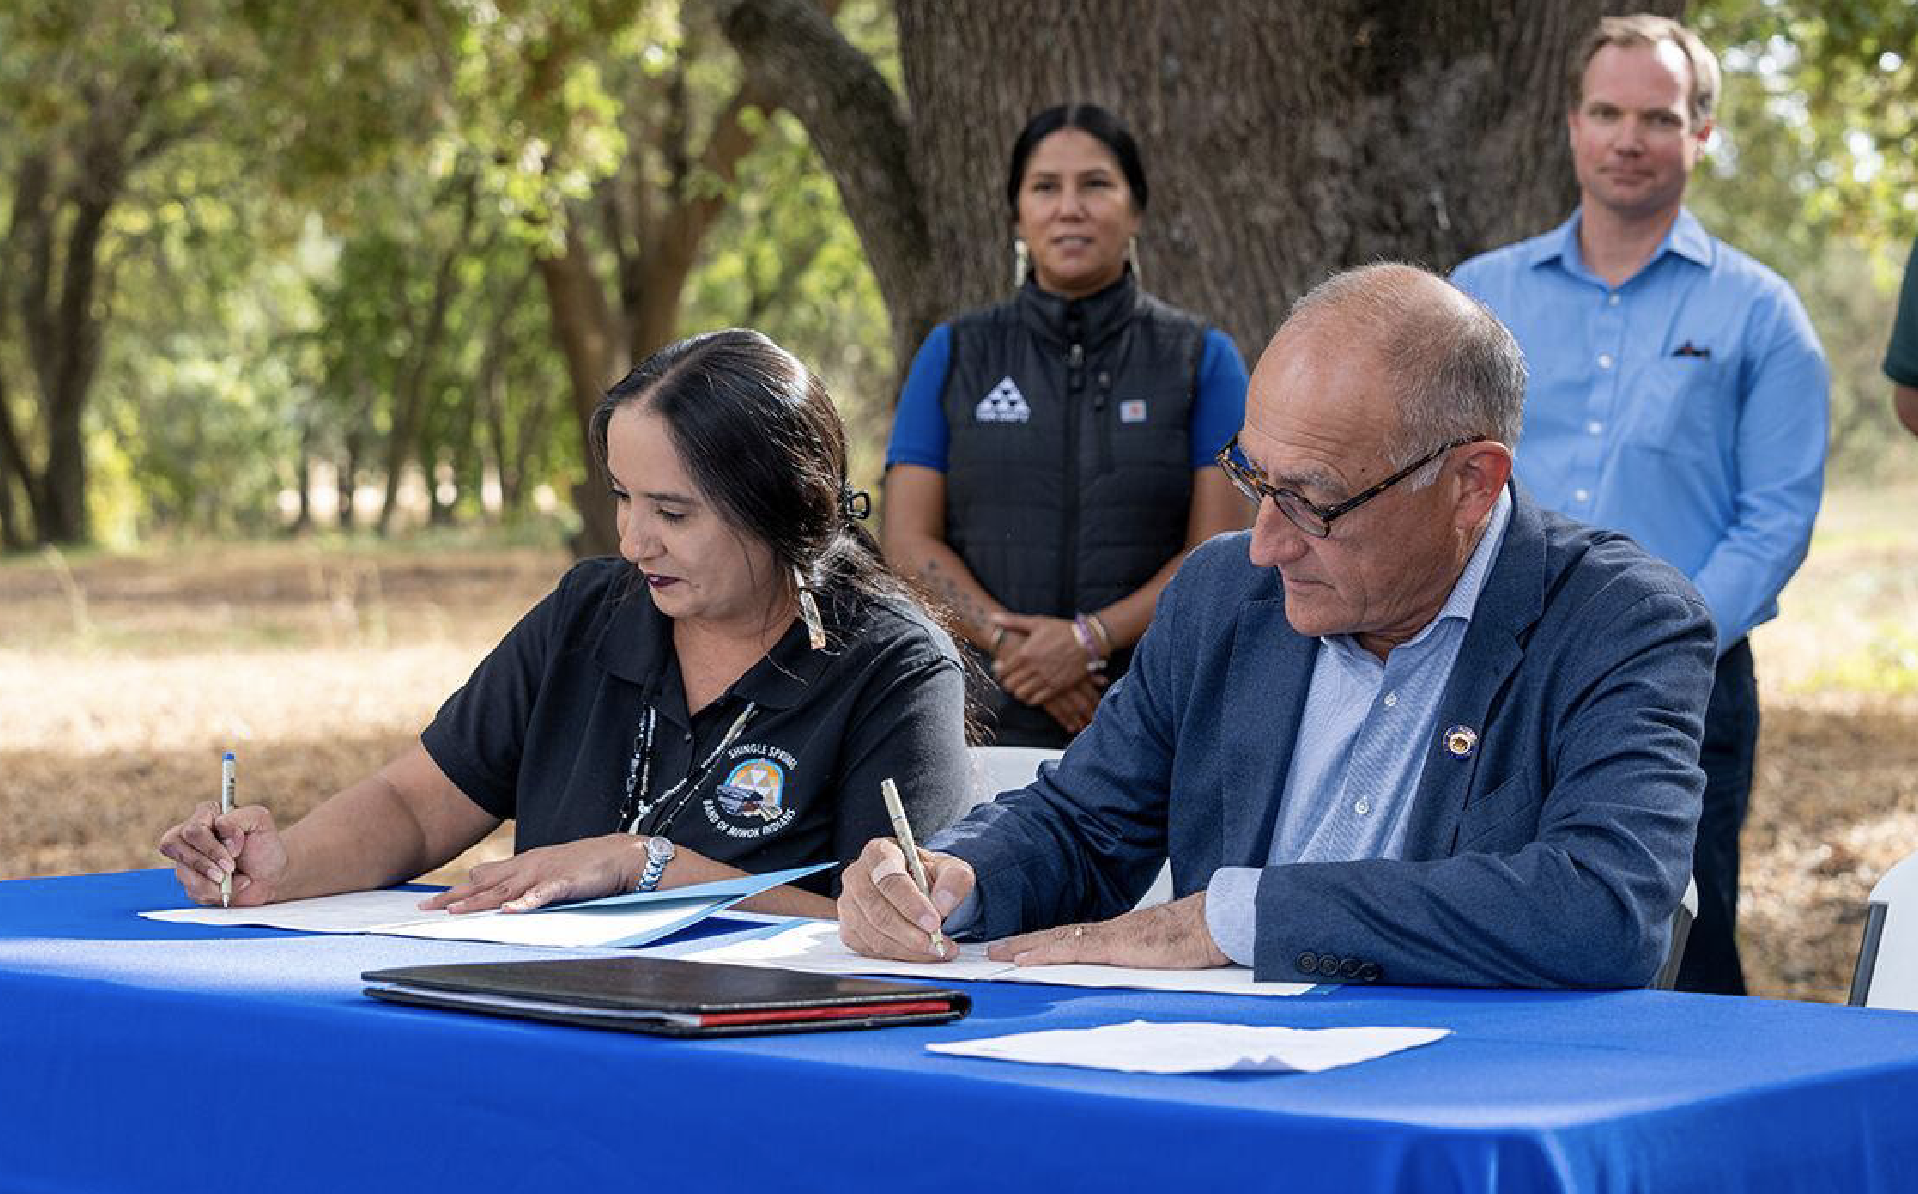 Shingle Springs Band of Miwok Indians partners with State Parks